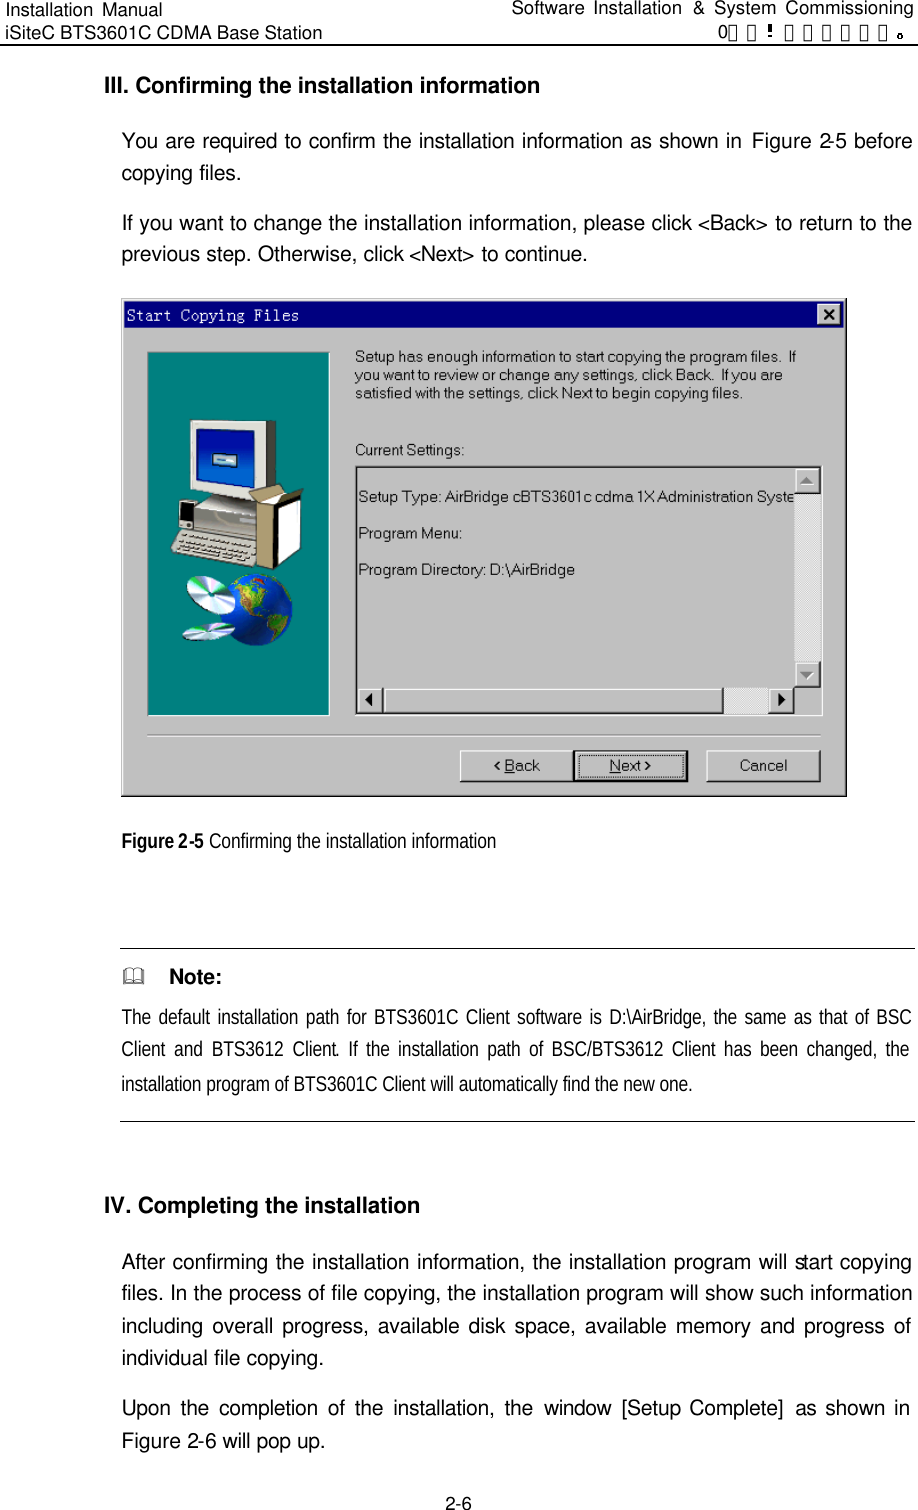 Installation Manual   iSiteC BTS3601C CDMA Base Station Software Installation &amp; System Commissioning 0错误 表格结果无效  2-6 III. Confirming the installation information You are required to confirm the installation information as shown in Figure 2-5 before copying files.   If you want to change the installation information, please click &lt;Back&gt; to return to the previous step. Otherwise, click &lt;Next&gt; to continue.    Figure 2-5 Confirming the installation information  &amp;  Note: The default installation path for BTS3601C Client software is D:\AirBridge, the same as that of BSC Client and BTS3612 Client. If the installation path of BSC/BTS3612 Client has been changed, the installation program of BTS3601C Client will automatically find the new one.    IV. Completing the installation After confirming the installation information, the installation program will start copying files. In the process of file copying, the installation program will show such information including overall progress, available disk space, available memory and progress of individual file copying.   Upon the completion of the installation, the window [Setup Complete]  as shown in Figure 2-6 will pop up.   